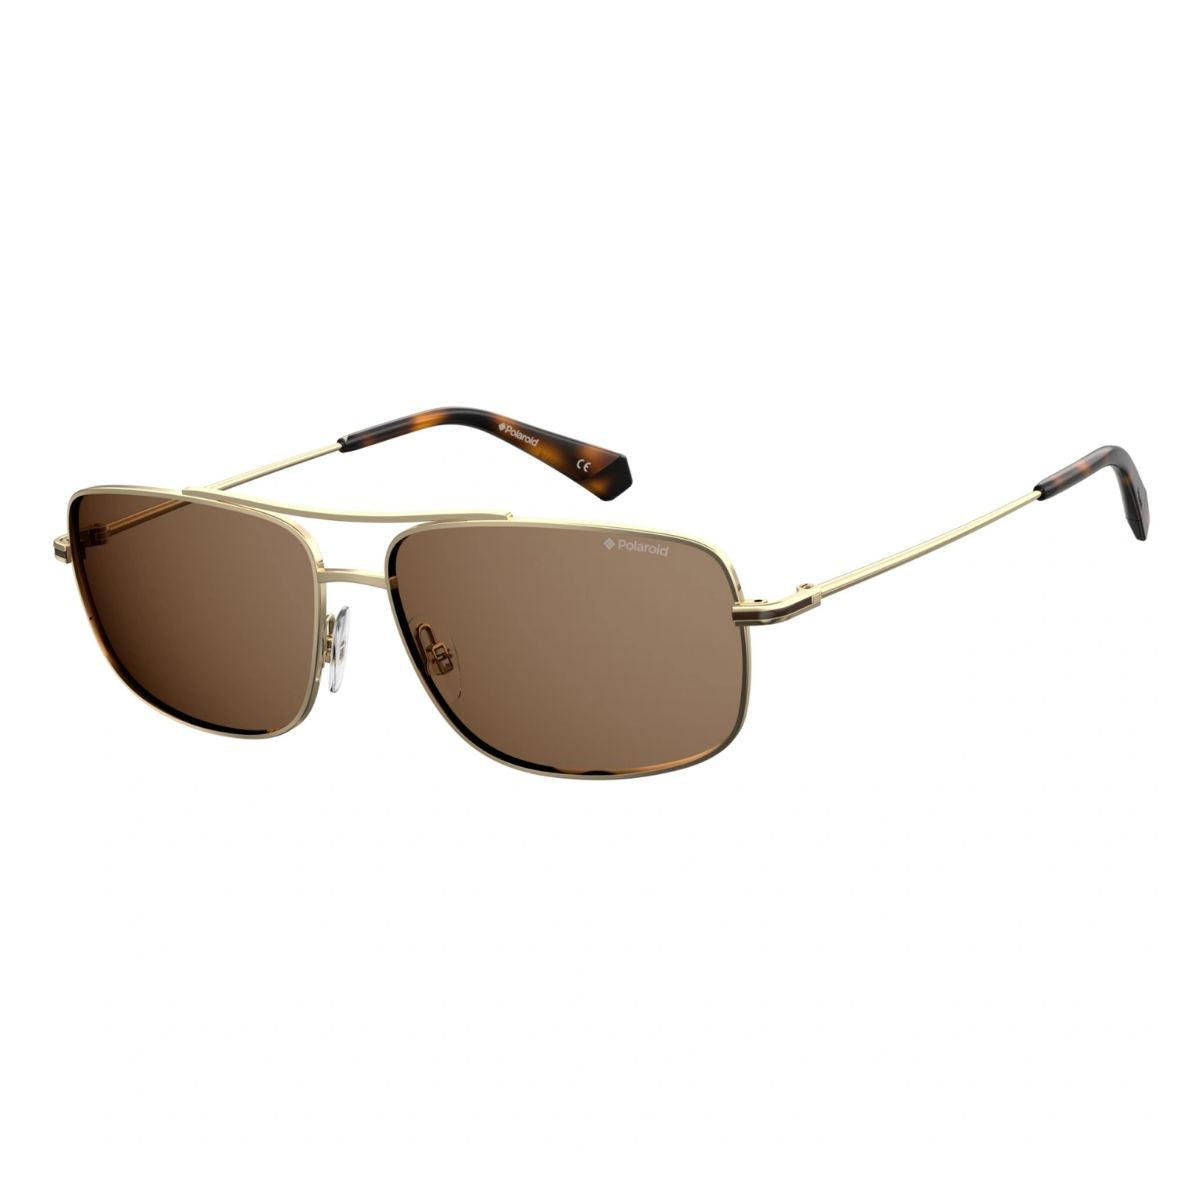 "Buy Branded Vintage Look Polarized Sunglasses For Men's At Optorium"